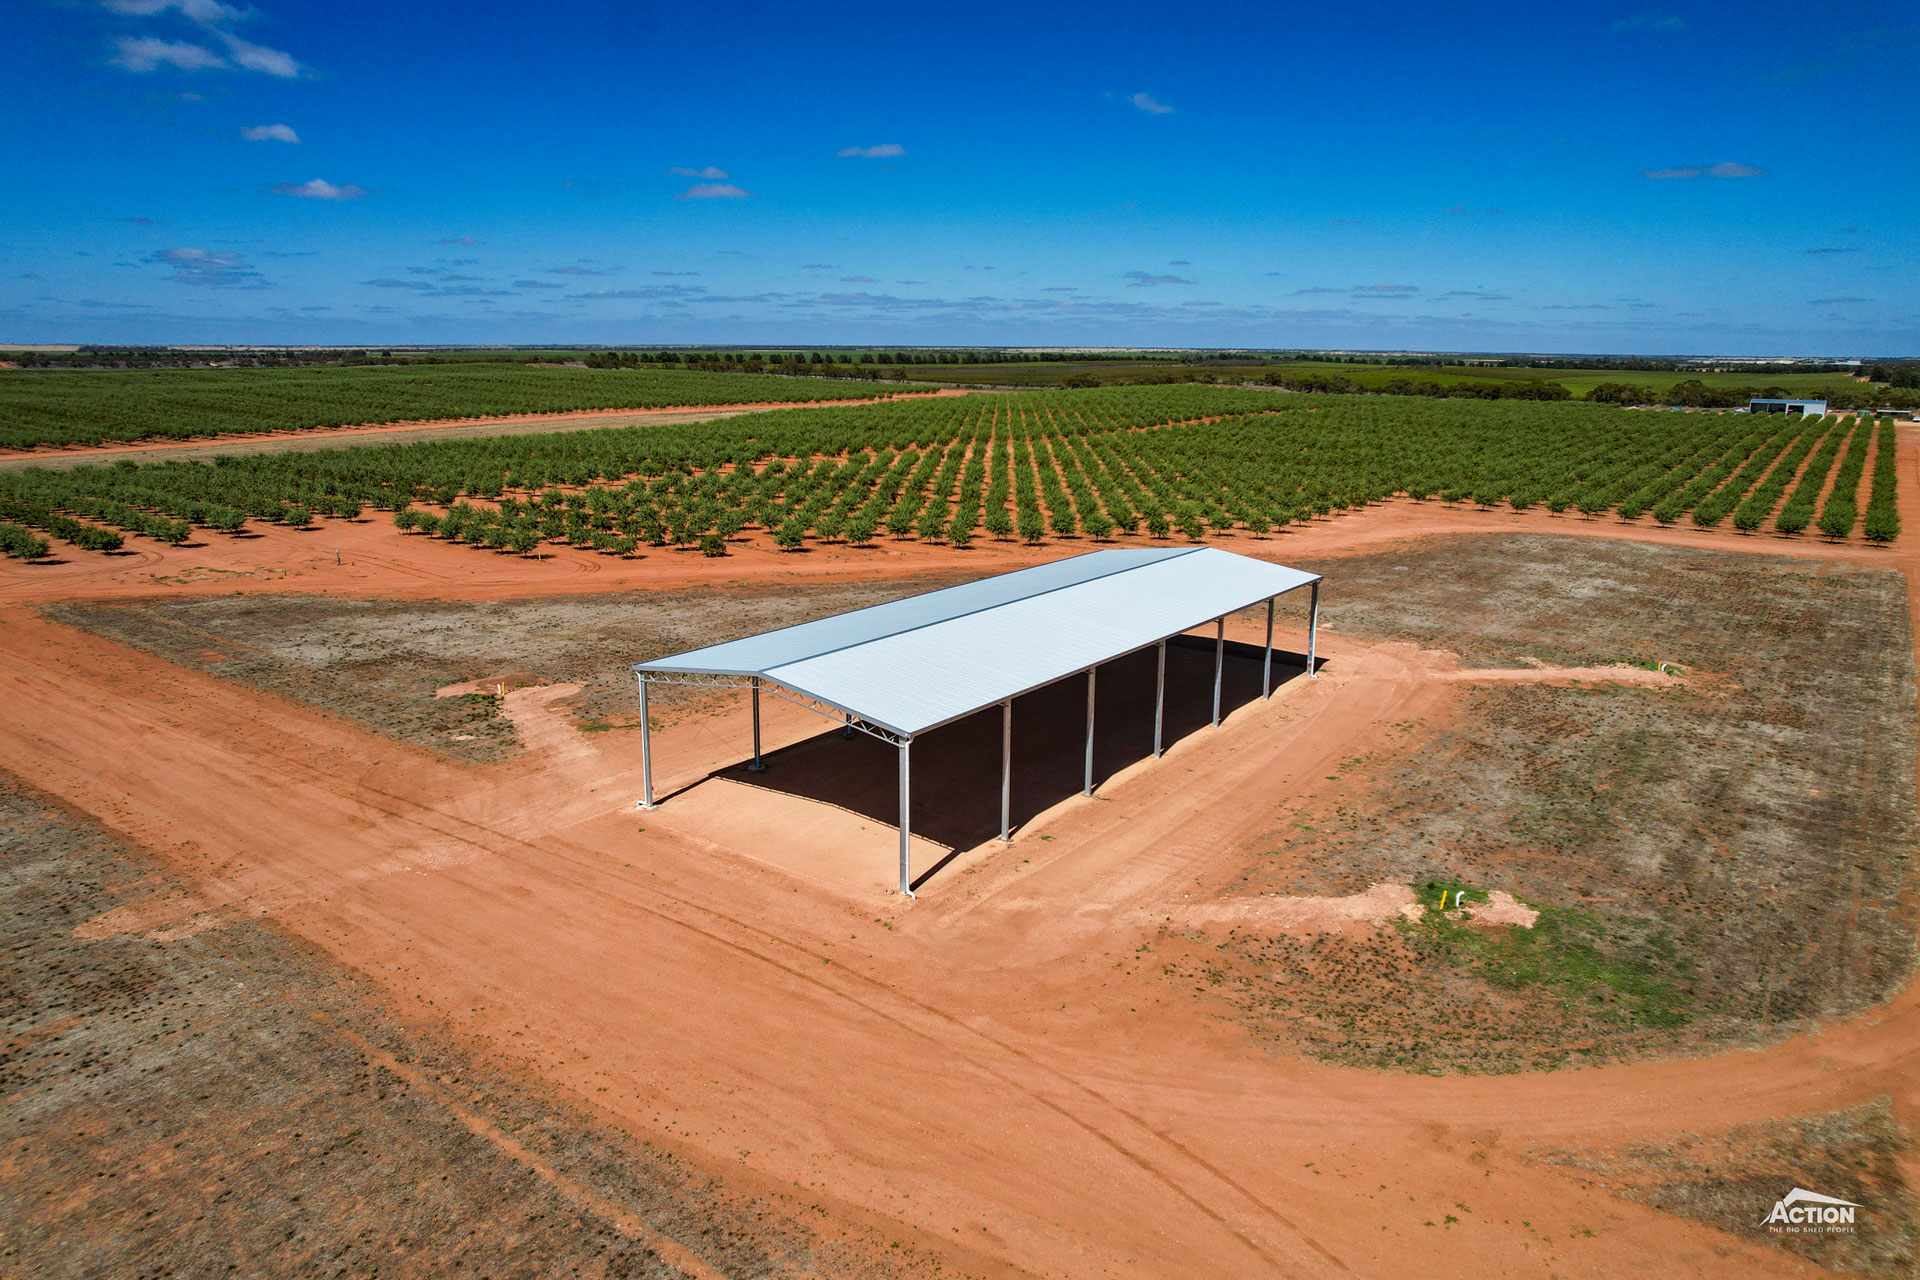 You are currently viewing 48m x 18m x 7.5m almond storage shed